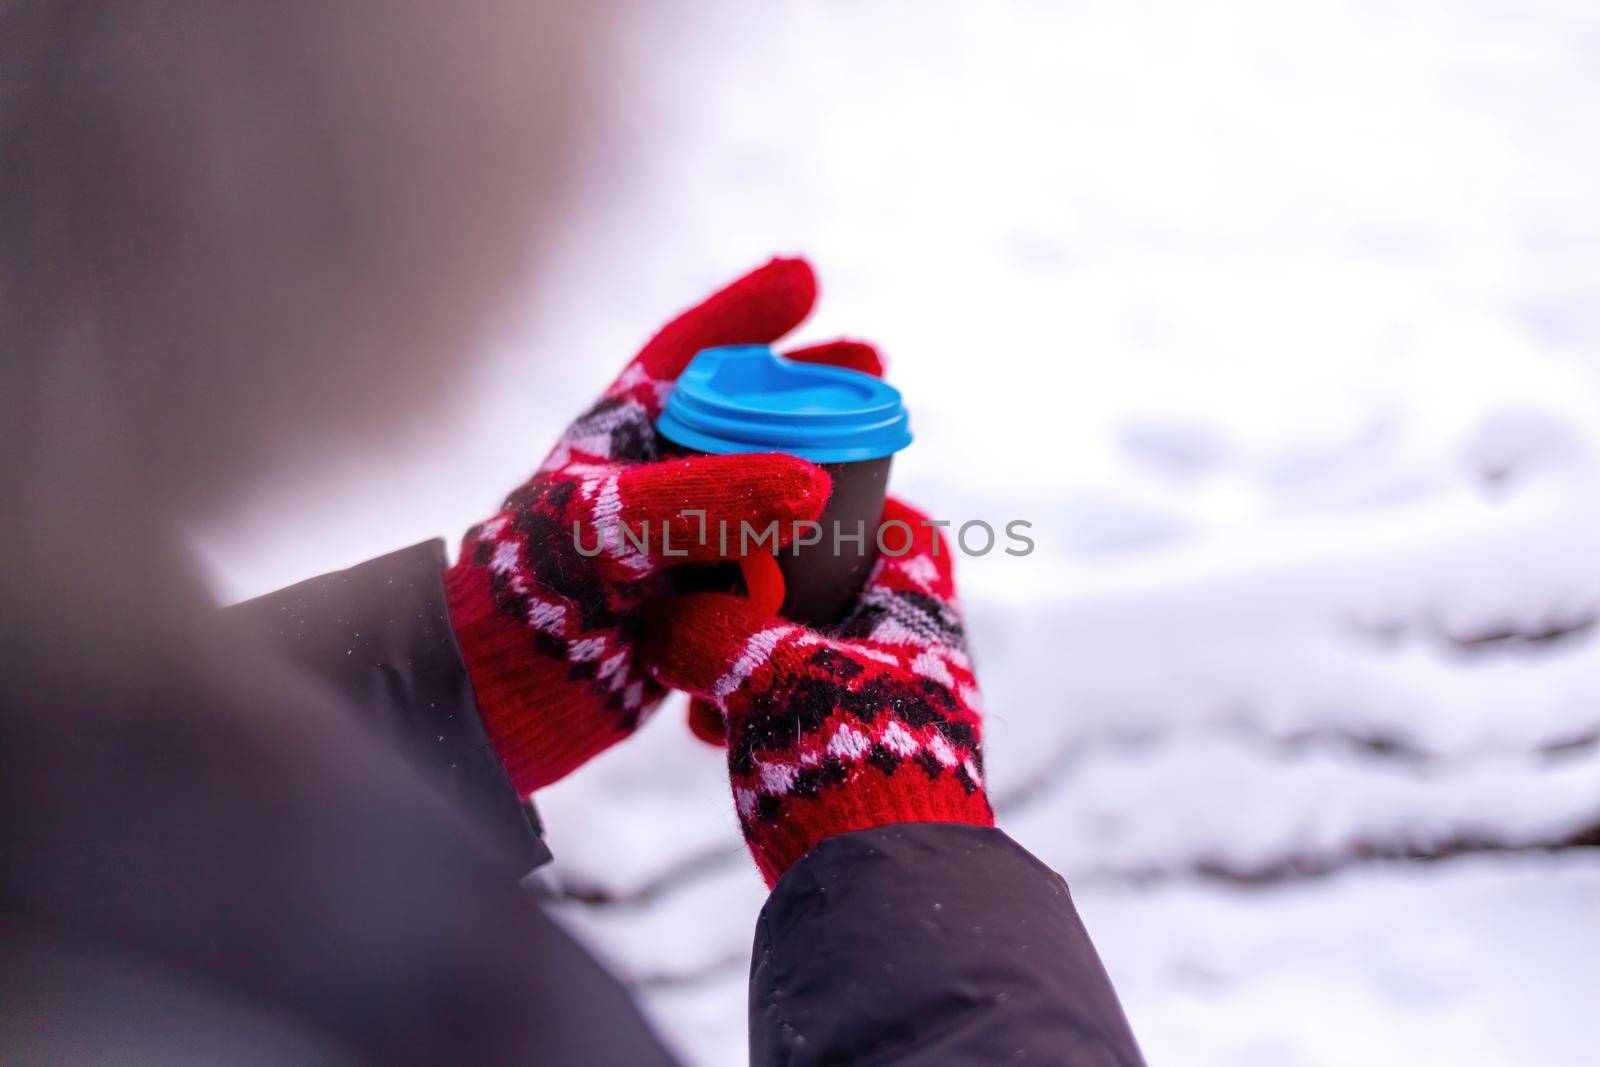 Women's hands in a red mittens hold a paper cup of coffee. Back side view on white snowy background.